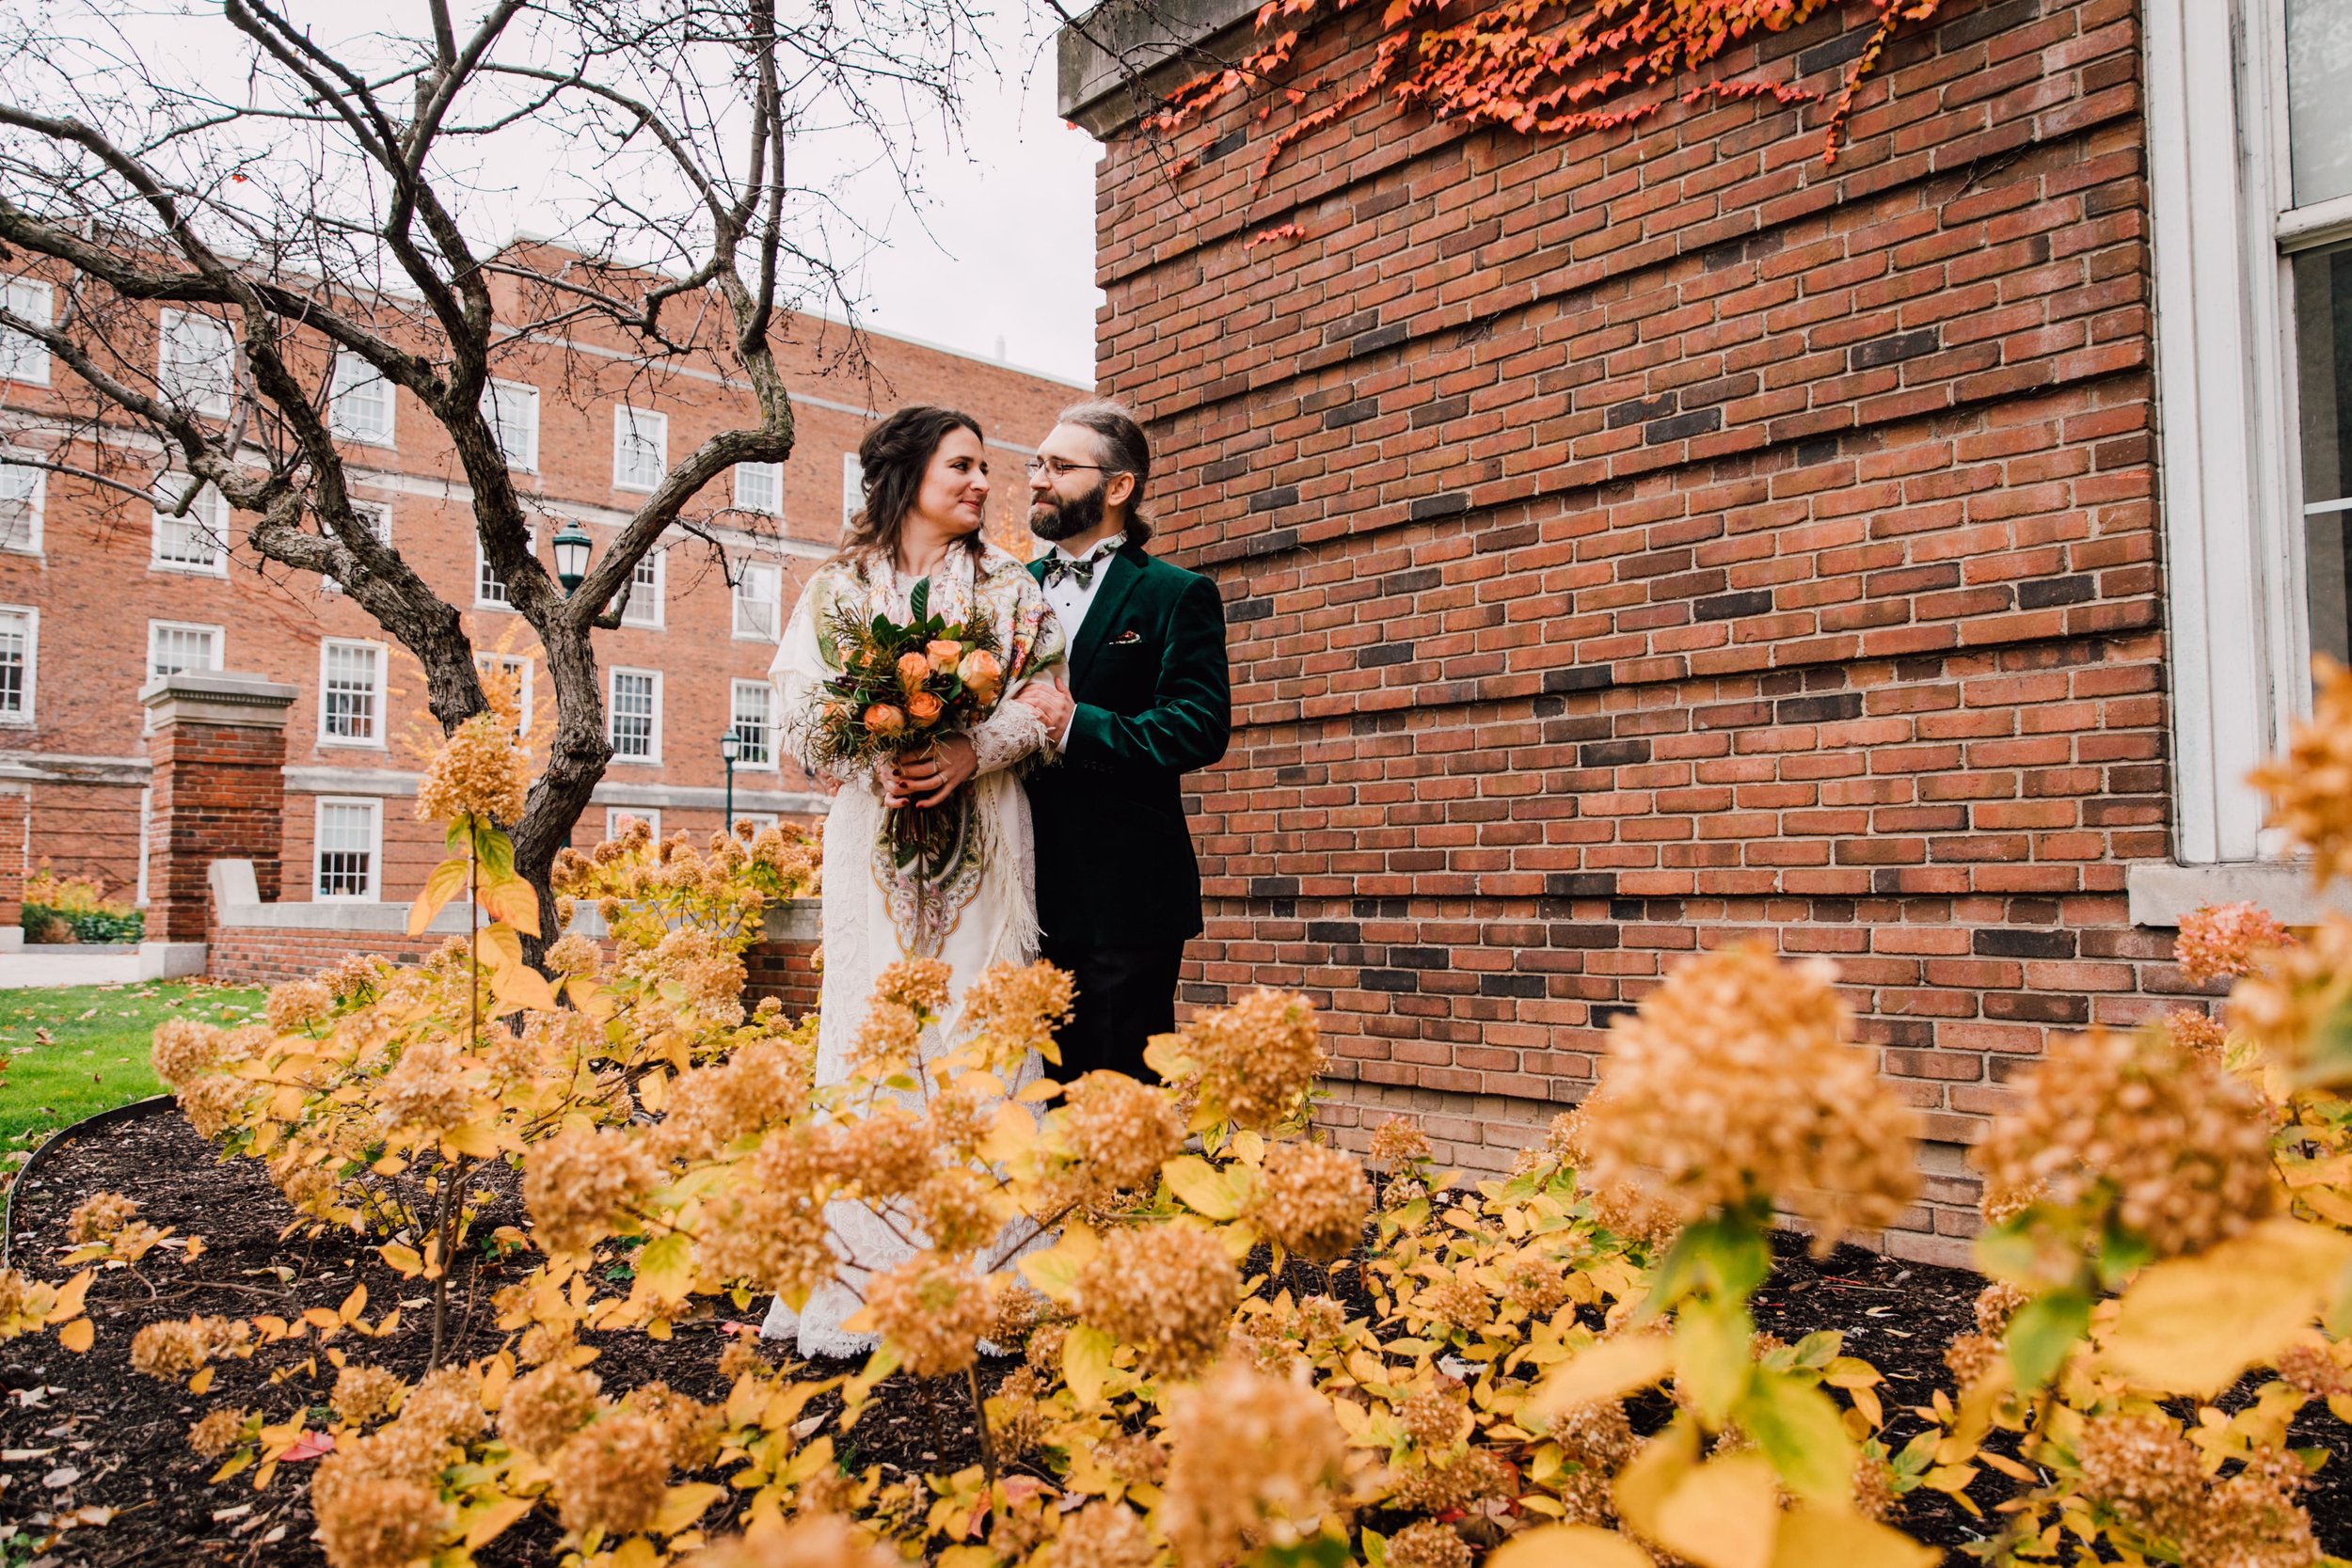  the bride and groom look at each other as the groom rests his hand on the brides arm and they stand in front of a brick building among fall foliage while syracuse ny wedding photographer captures their wedding portraits 